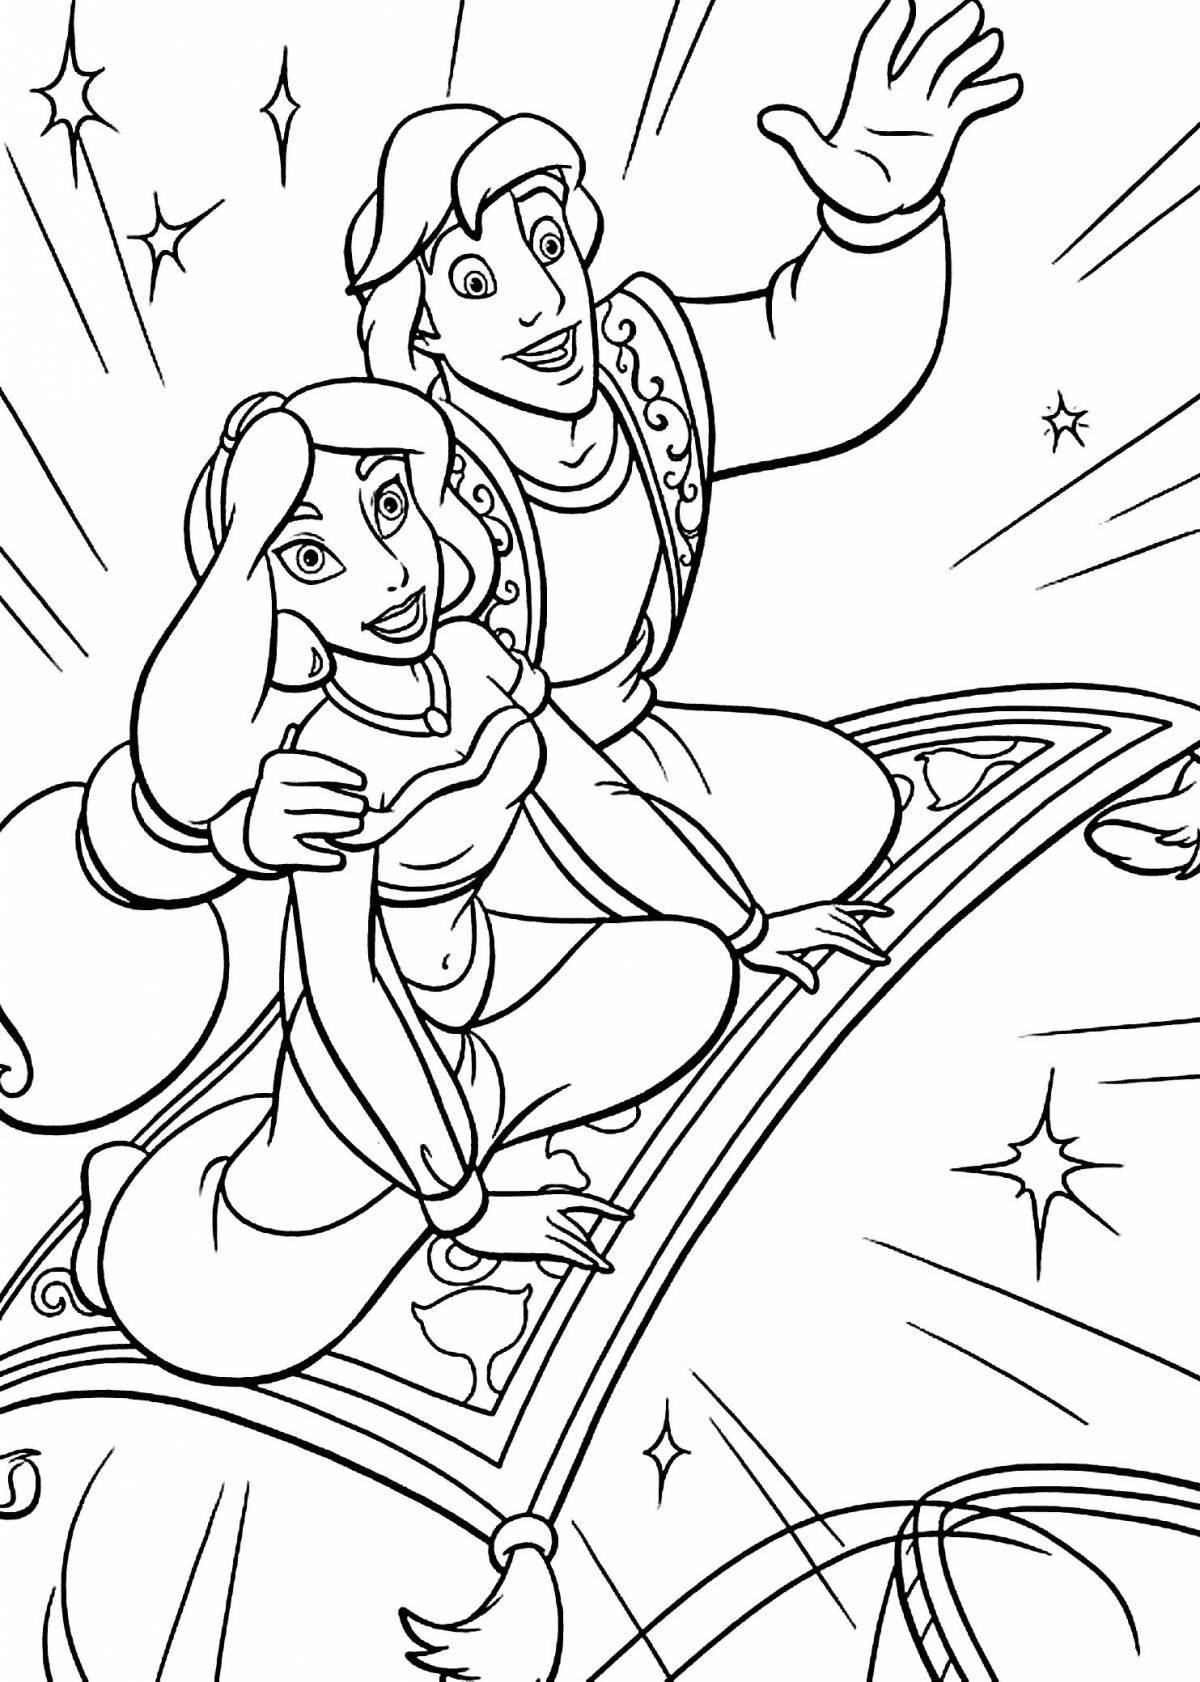 Aladdin's adorable coloring page